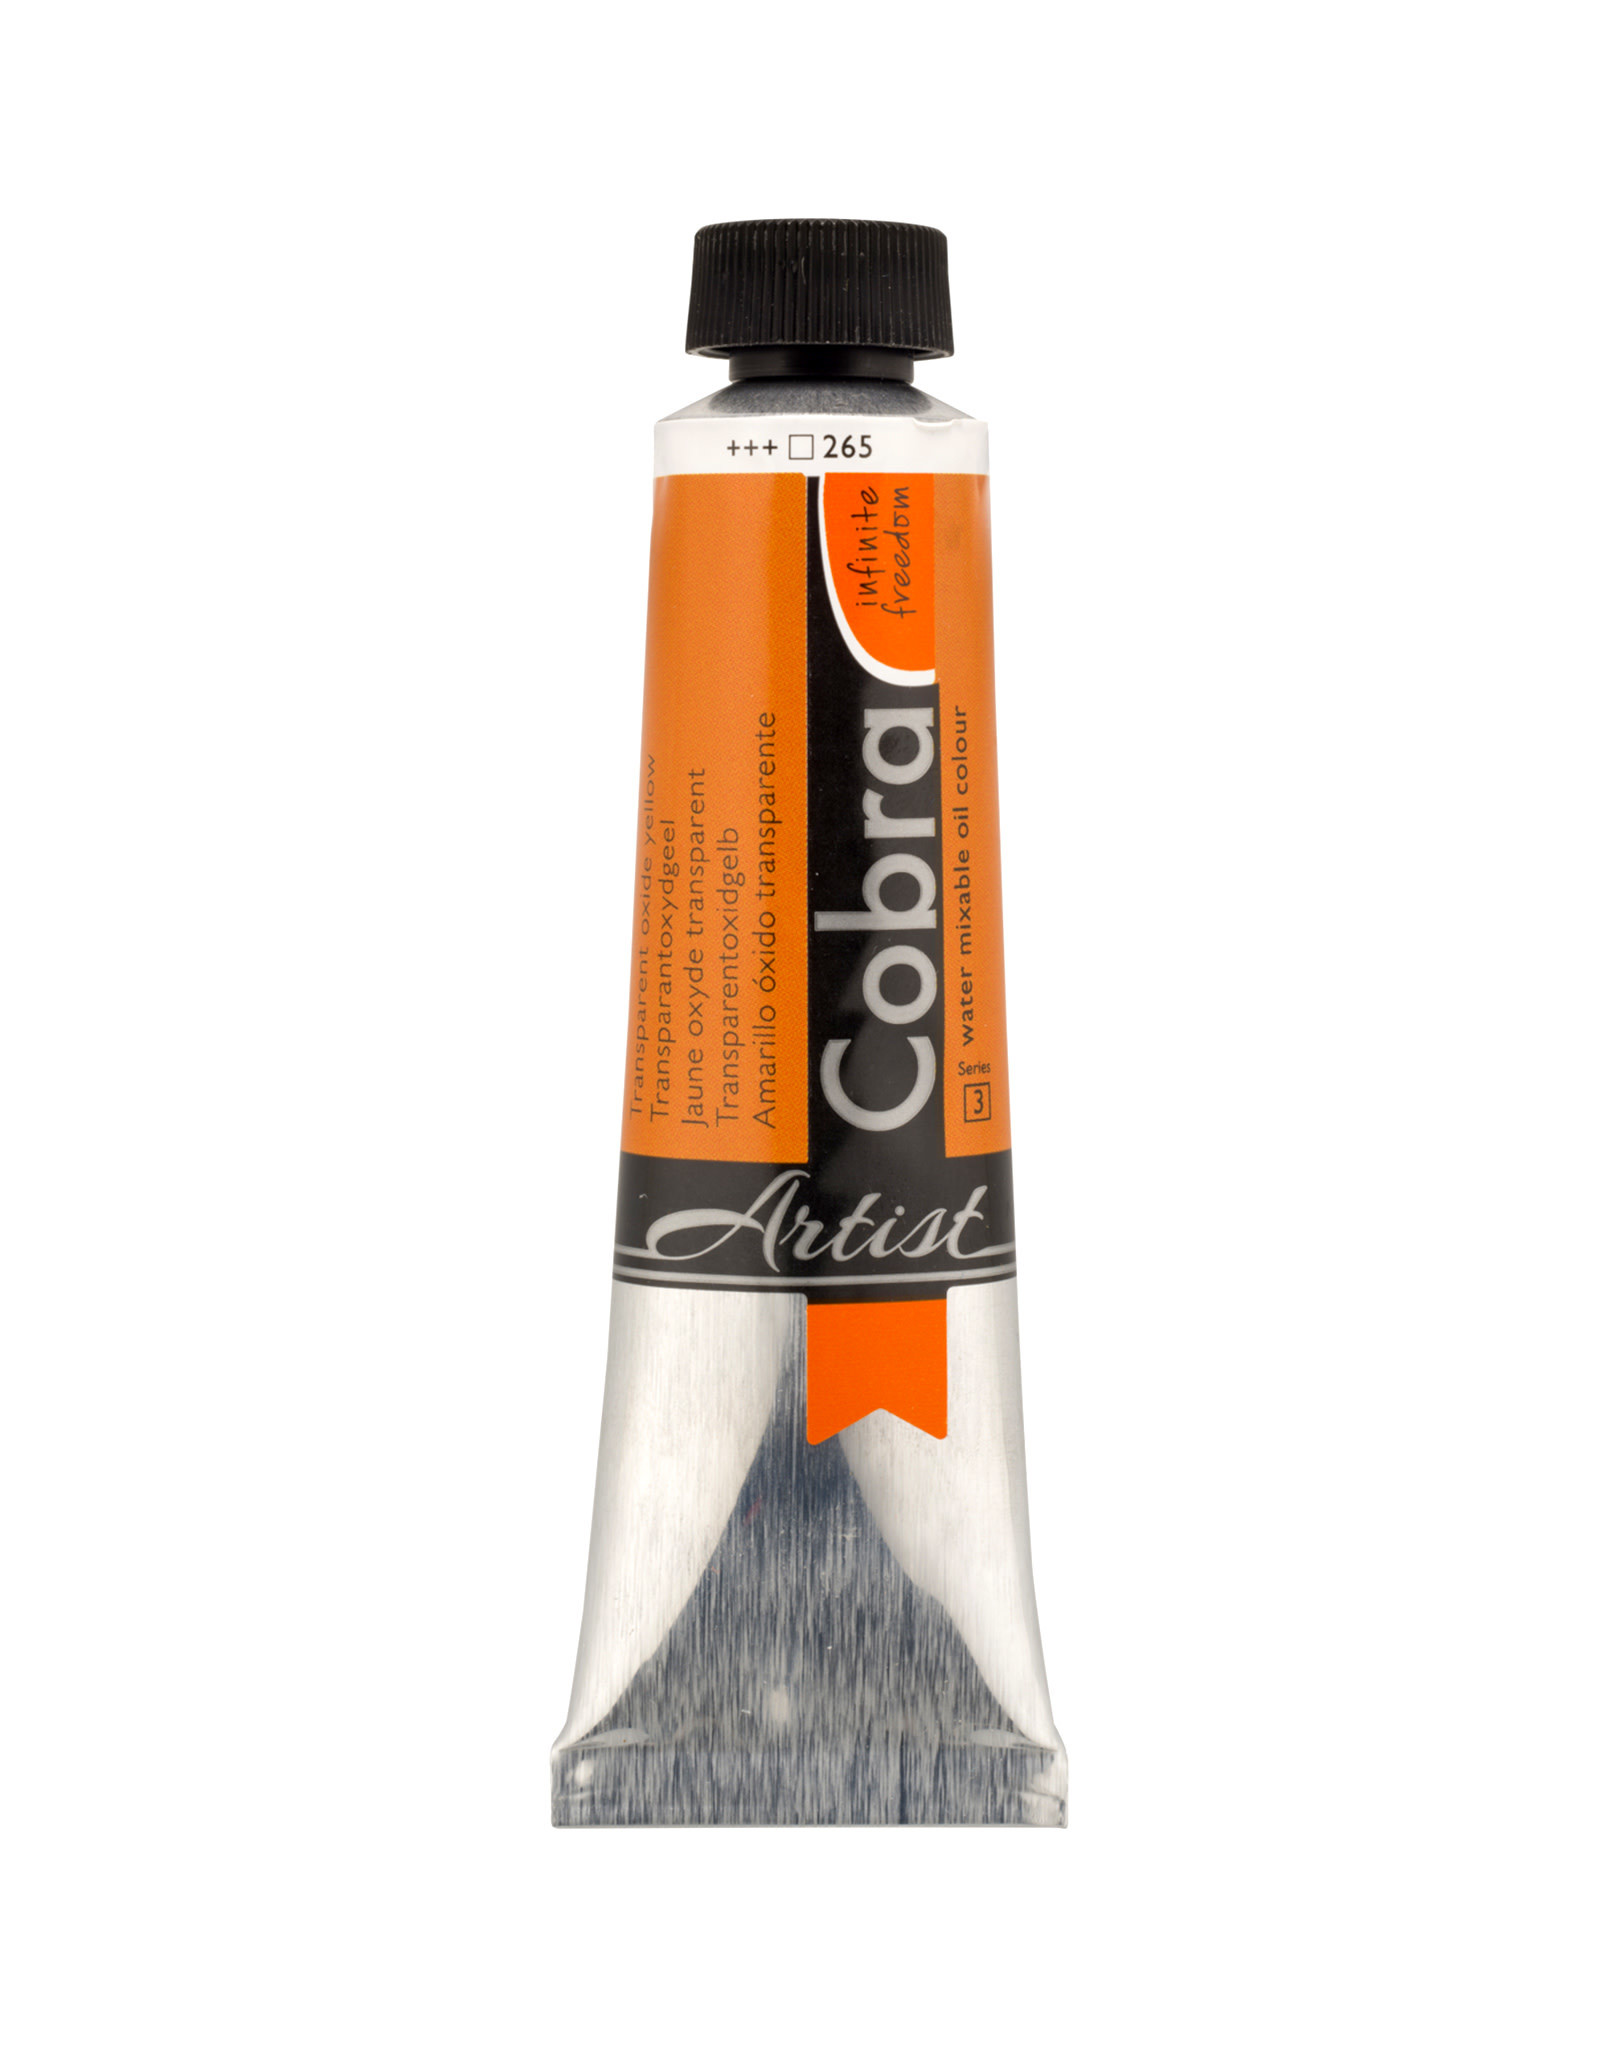 Royal Talens Cobra Water Mixable Artist Oils, Transparent Oxide Yellow 40ml